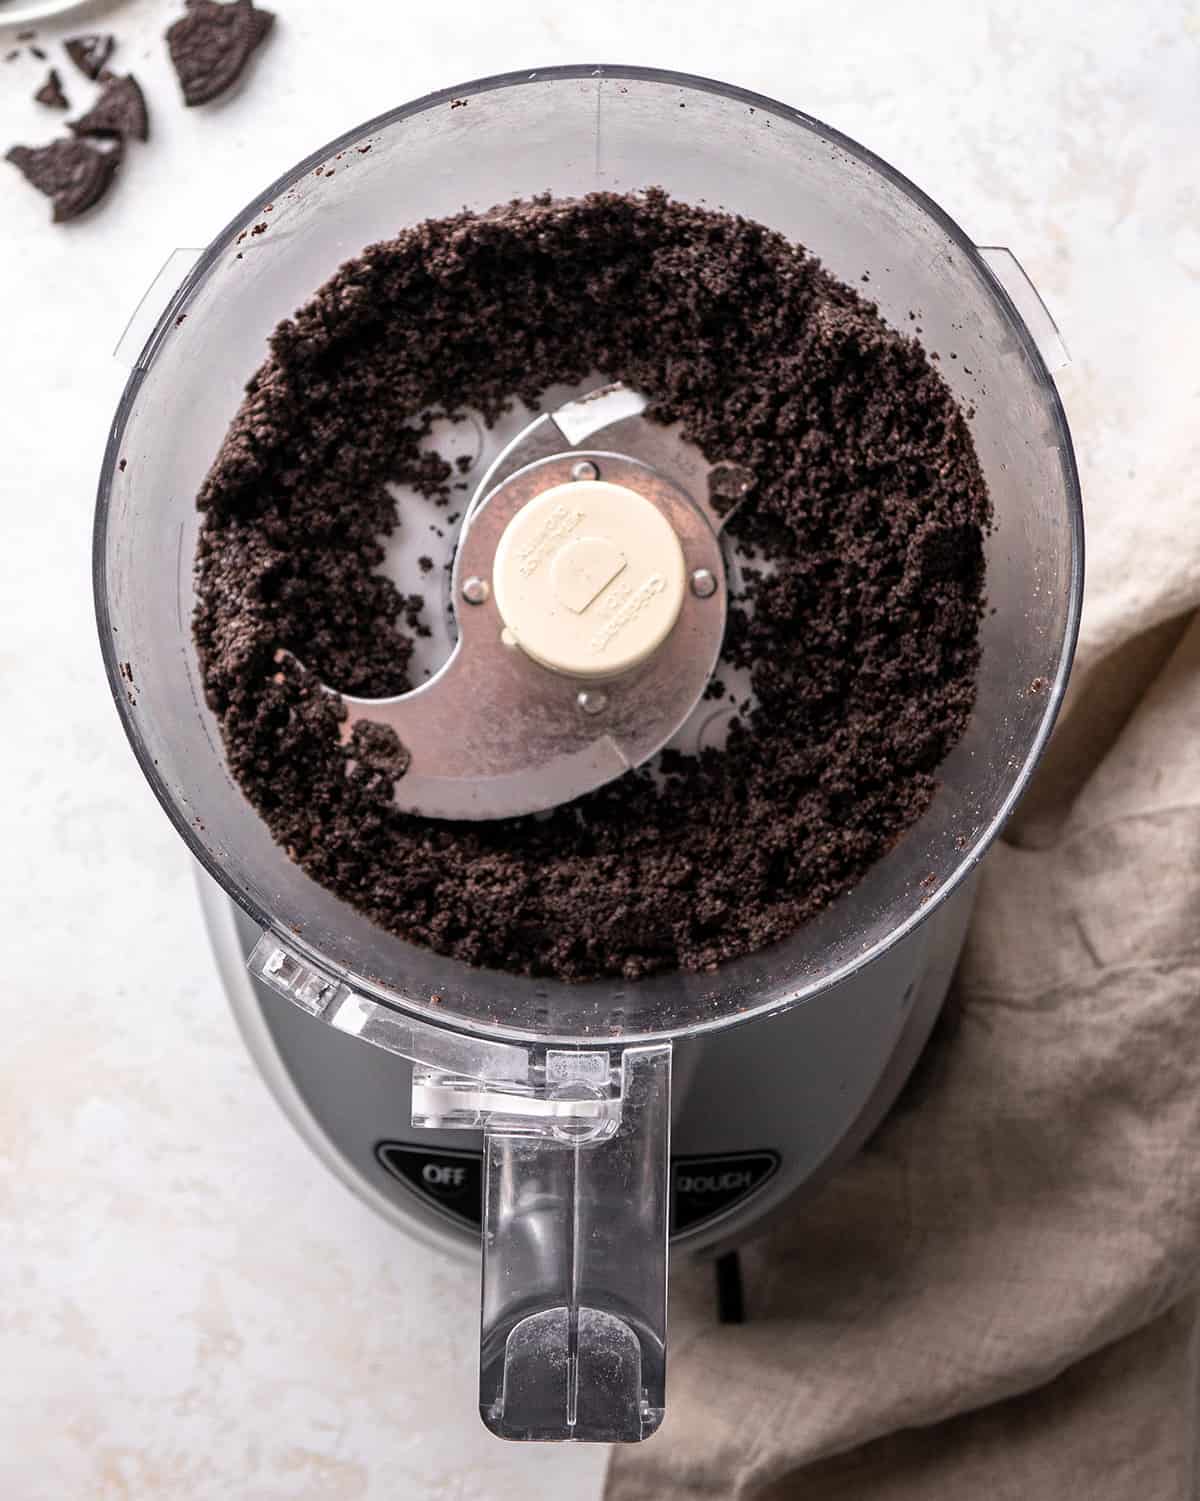 oreo crumbs in a food processor after processing to make oreo pie